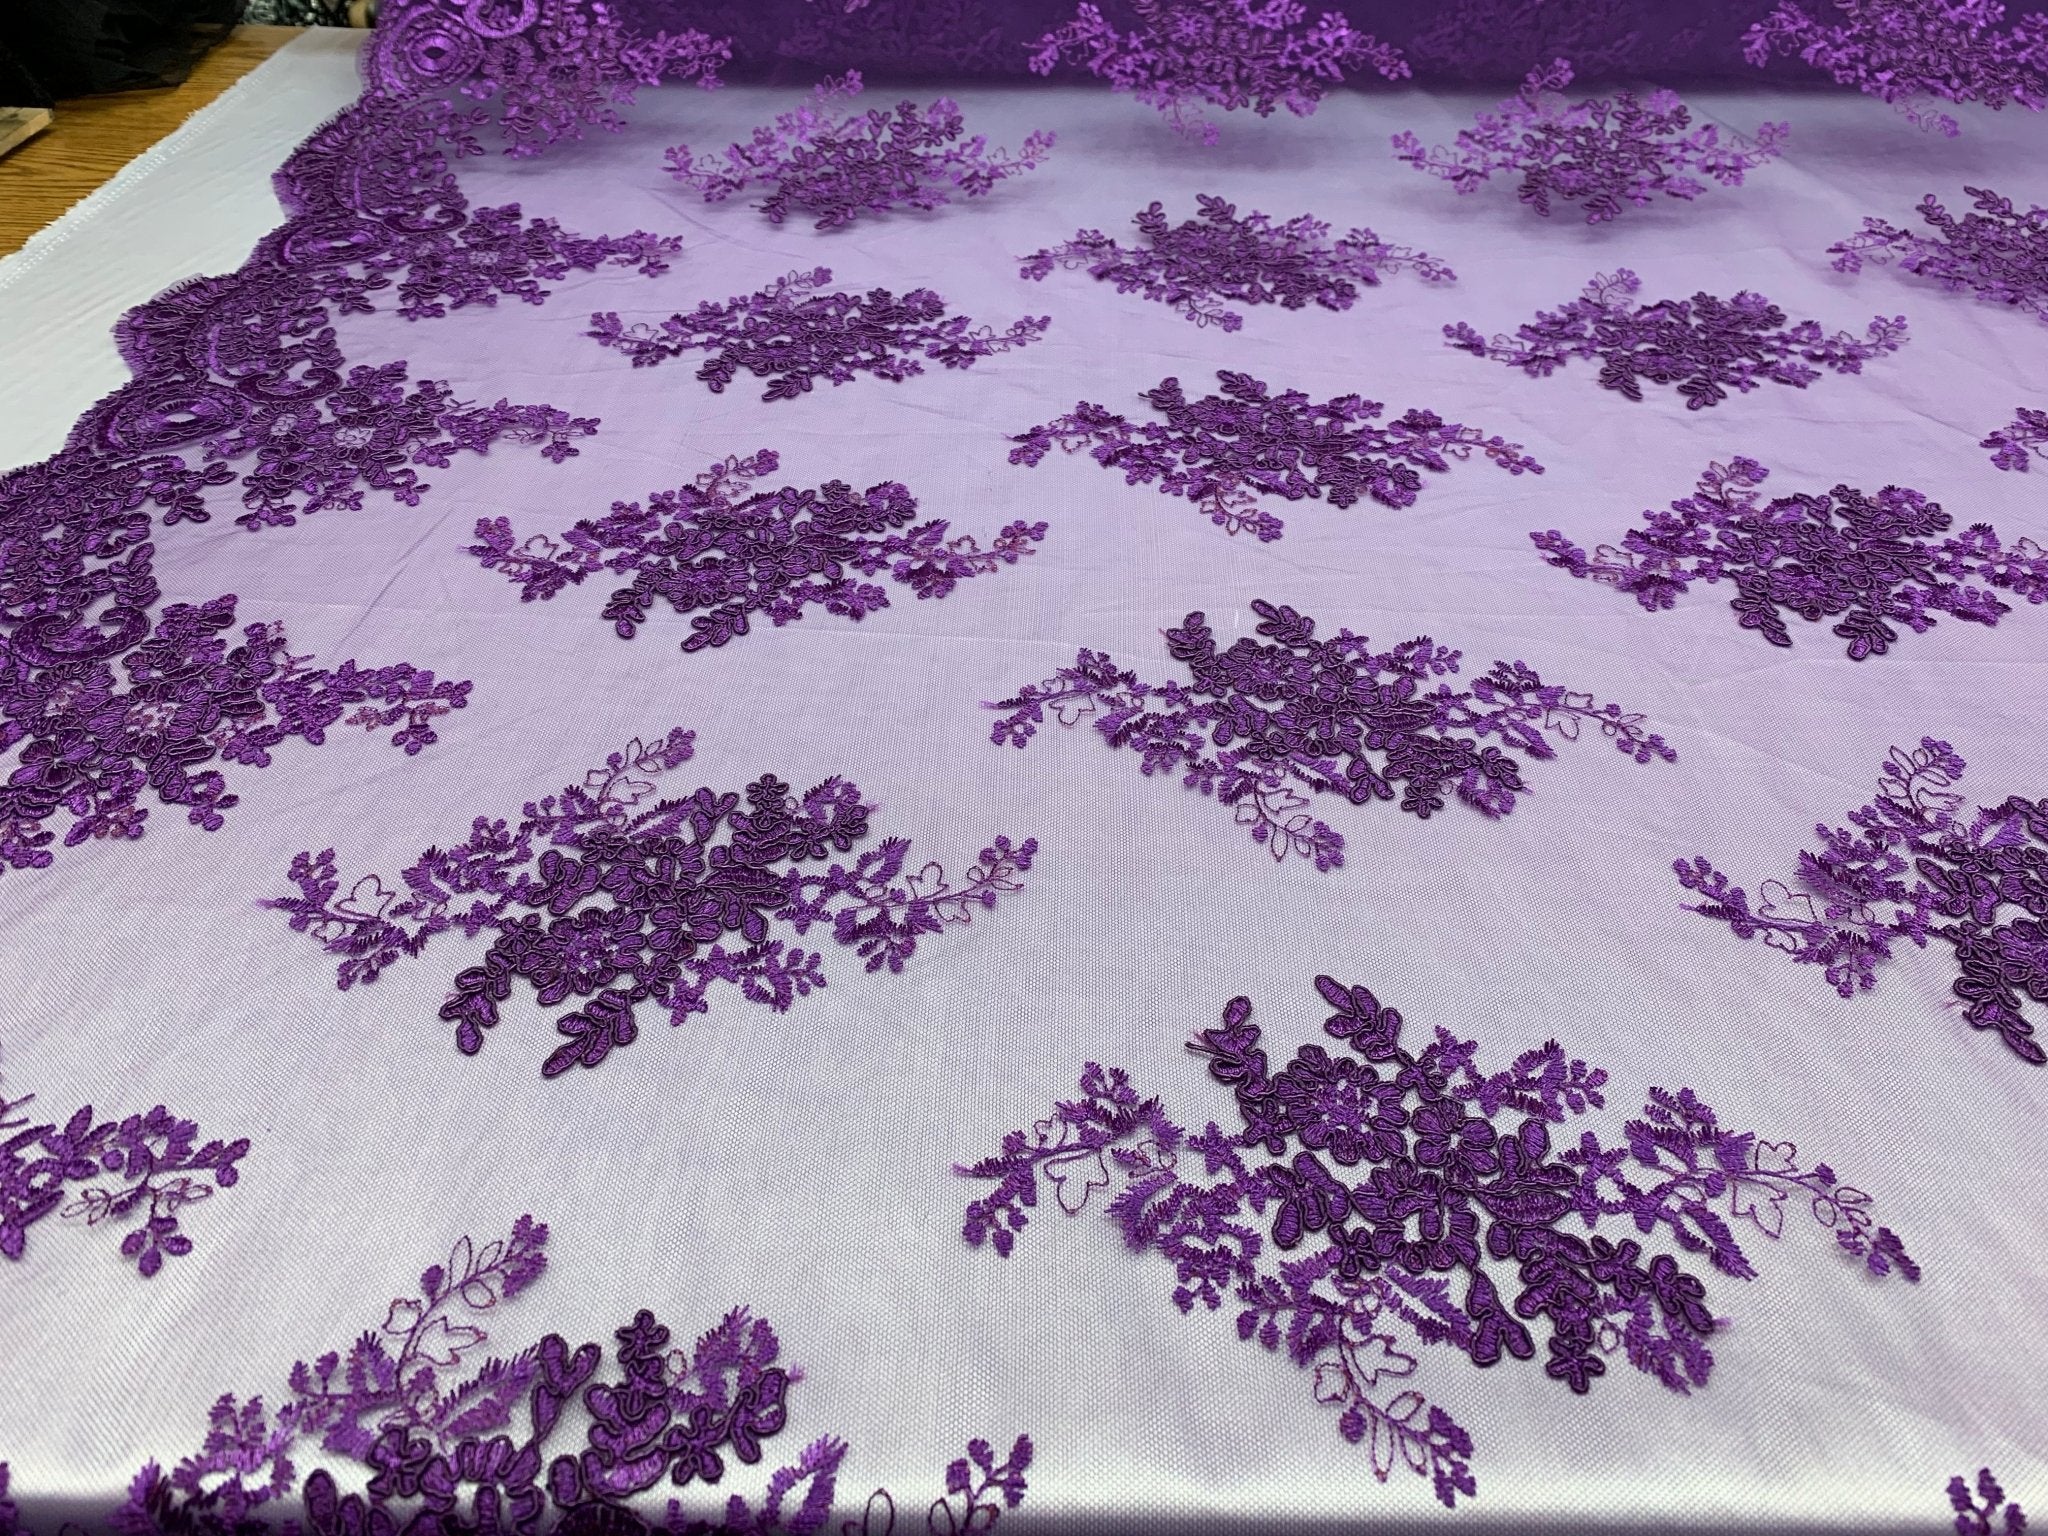 French Design Flower/Floral Mesh Lace (By The Yard) Embroidery Lace Fabric (Purple) For Tablecloths/ Runners/ Skirts/ CostumesICE FABRICSICE FABRICSFrench Design Flower/Floral Mesh Lace (By The Yard) Embroidery Lace Fabric (Purple) For Tablecloths/ Runners/ Skirts/ Costumes ICE FABRICS